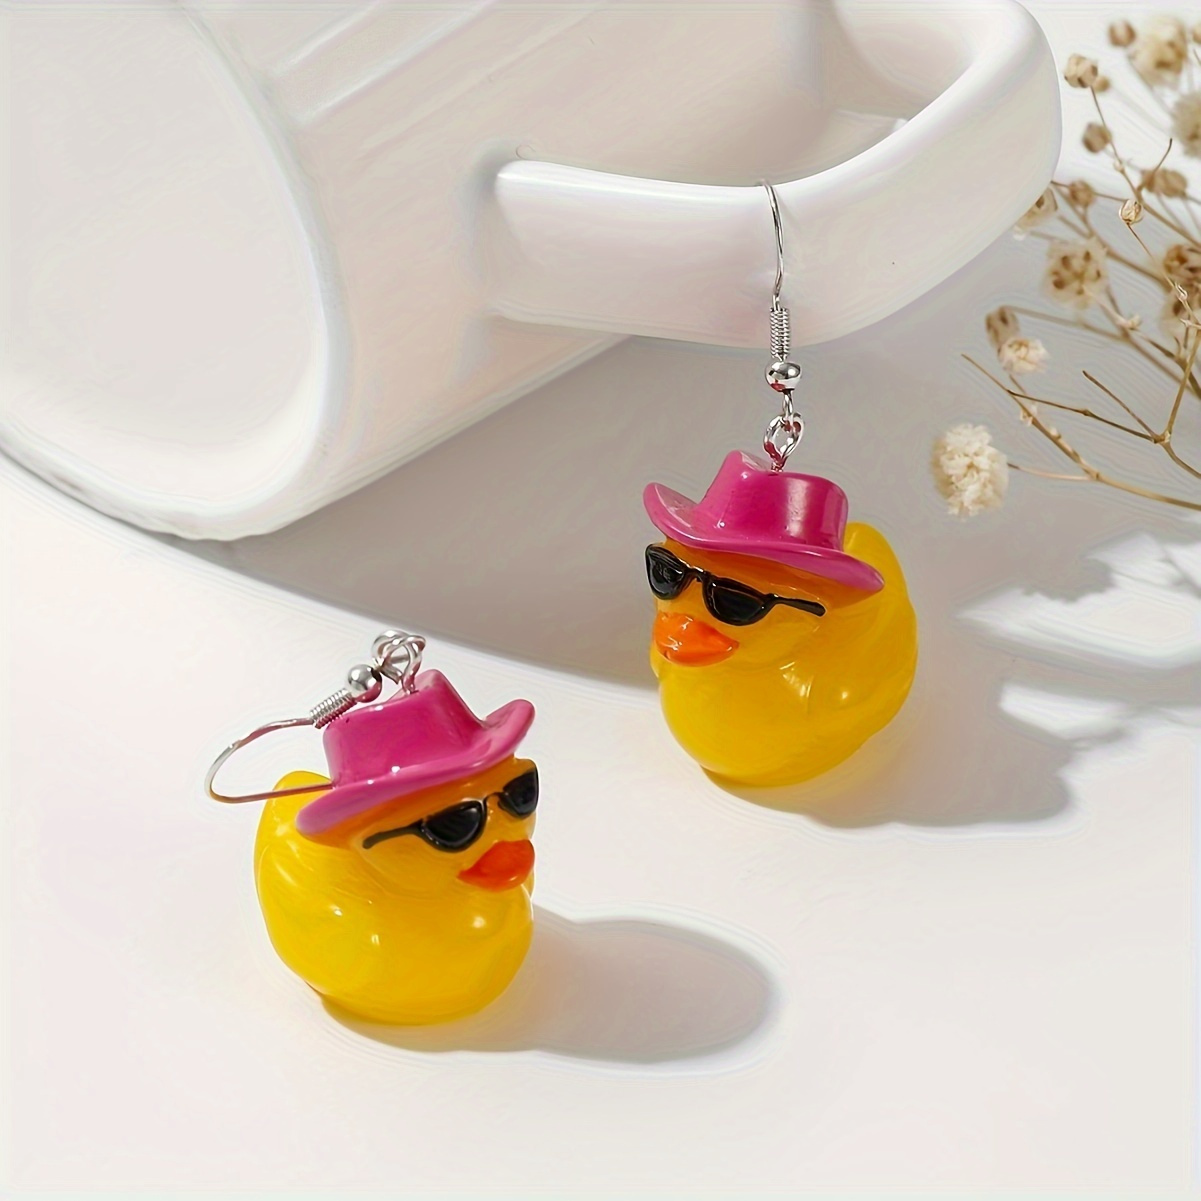 

Cute Drop Earrings Lovely Duck Design Match Daily Outfits Party Accessories Preppy Staff Creative And Funny Thing For Female